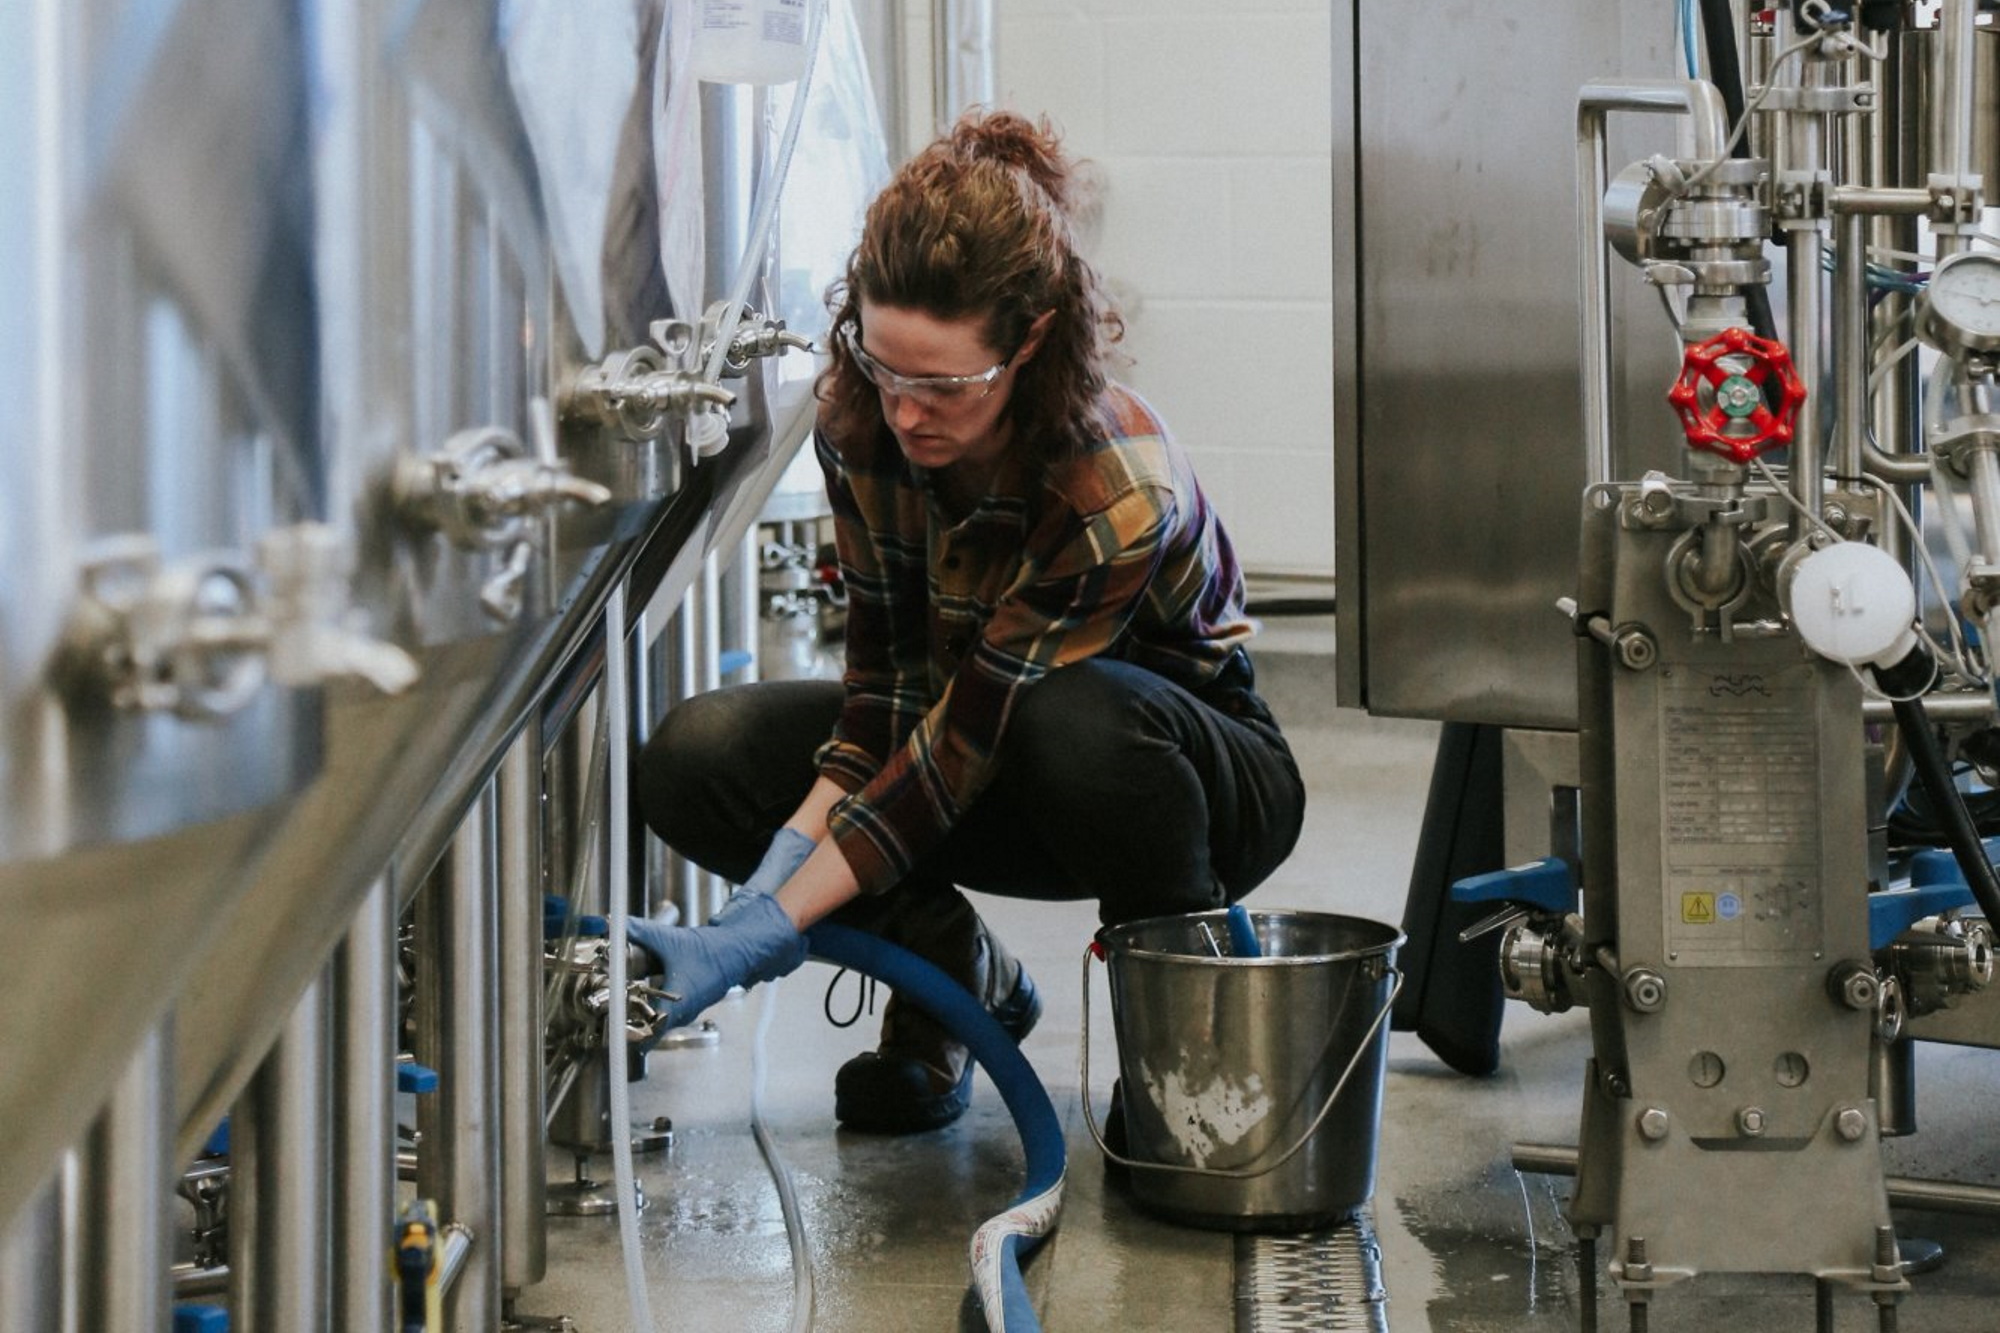 A woman adjusting valves on a family run brewing business.